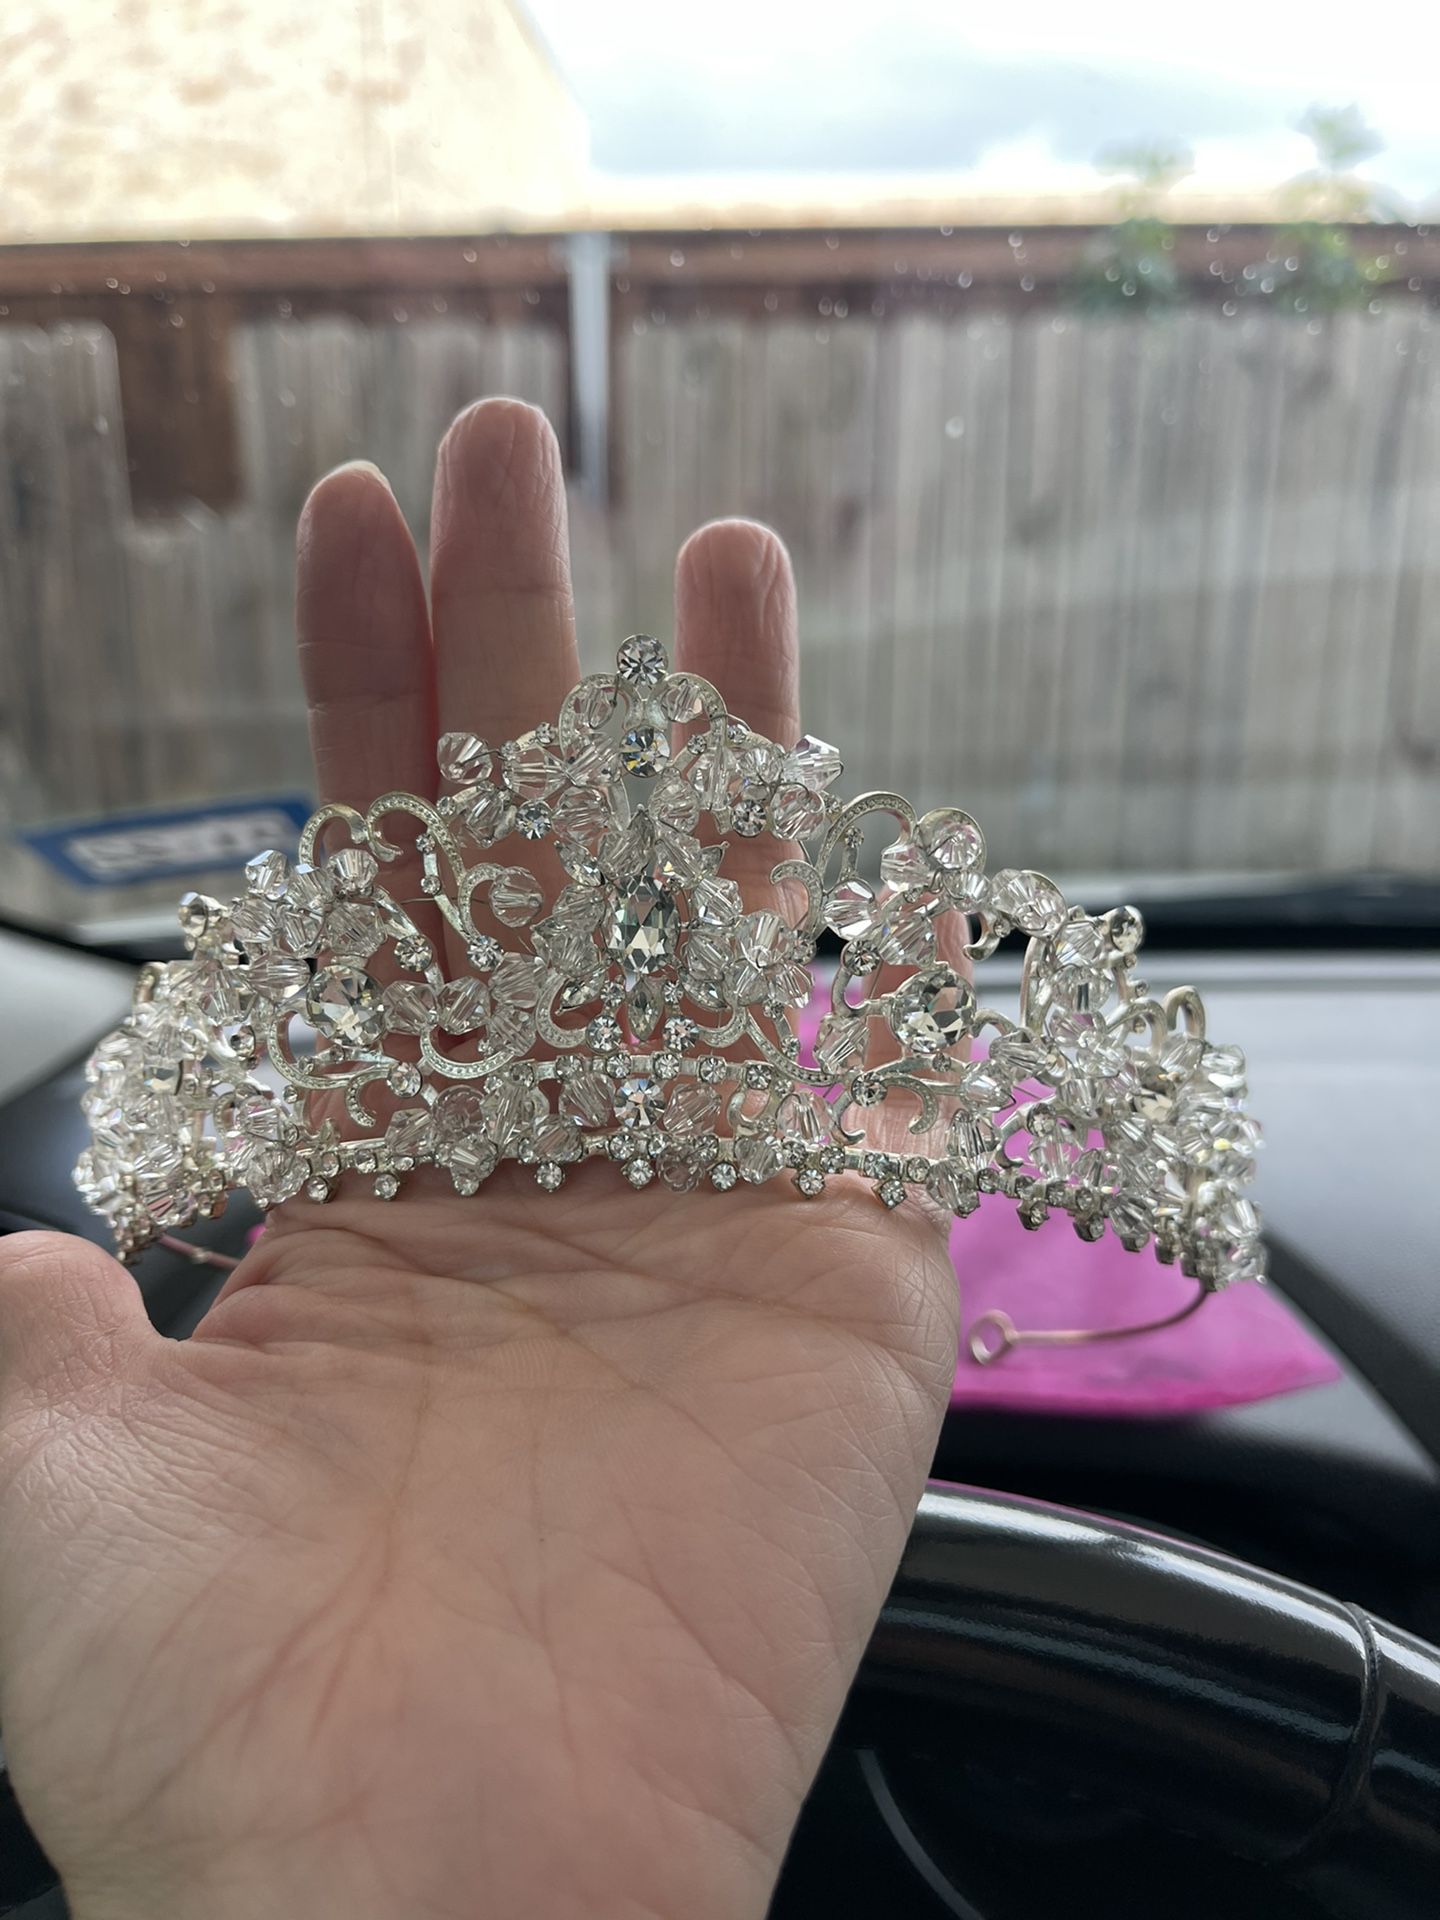 Brand New Tiara From Sunday’s bride Never Worn No Bad Juju Just Wore My Hair Different !